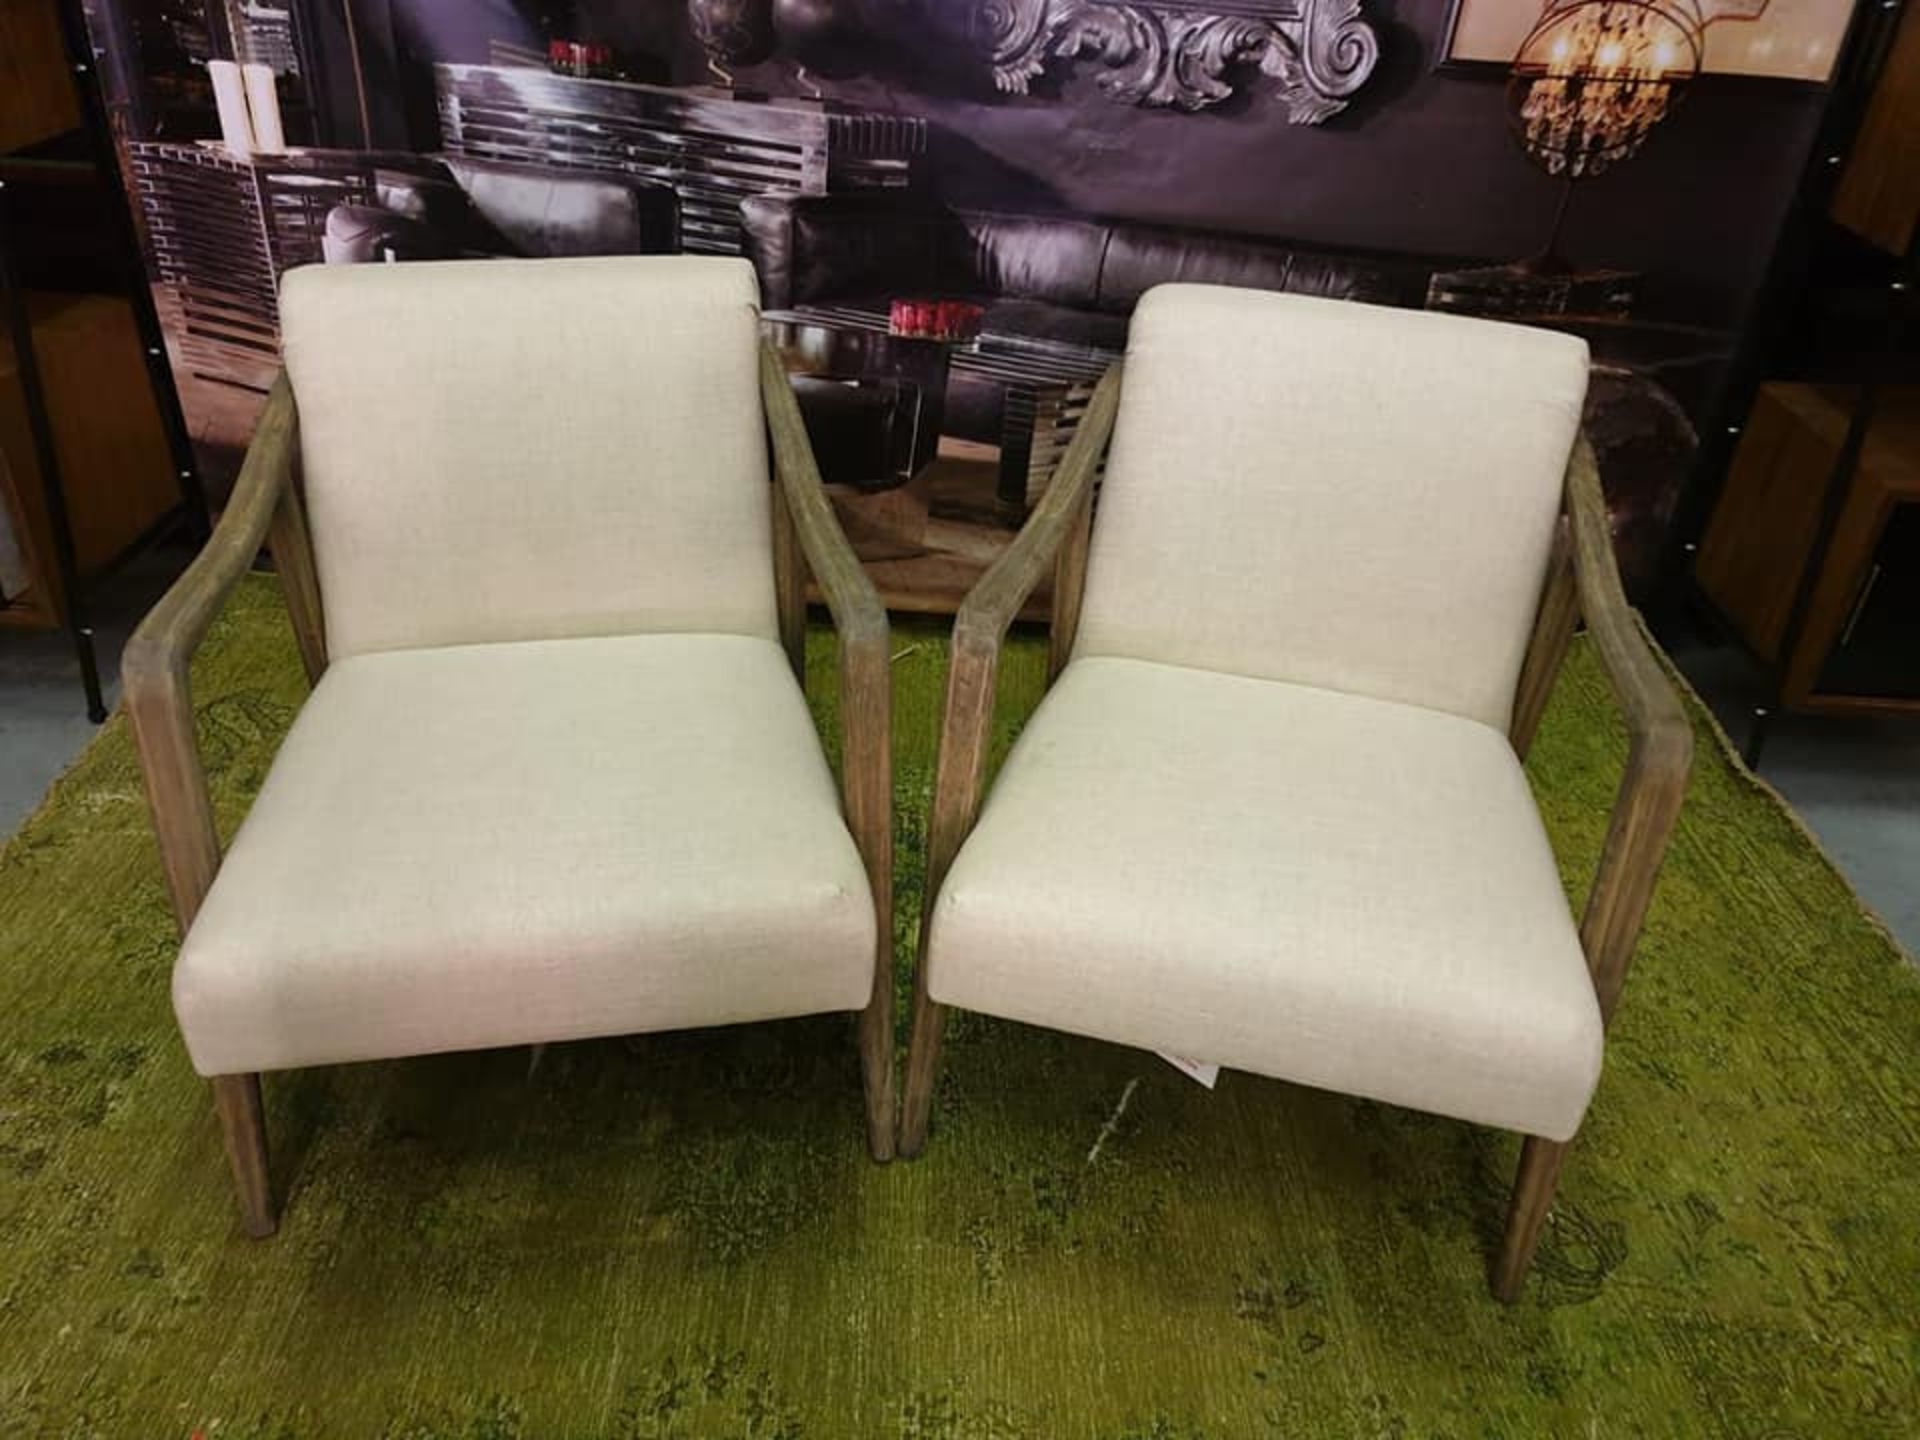 A pair of Alton Natural Ecru Linen Chairs The Alton chair is a classic and sophisticated weathered